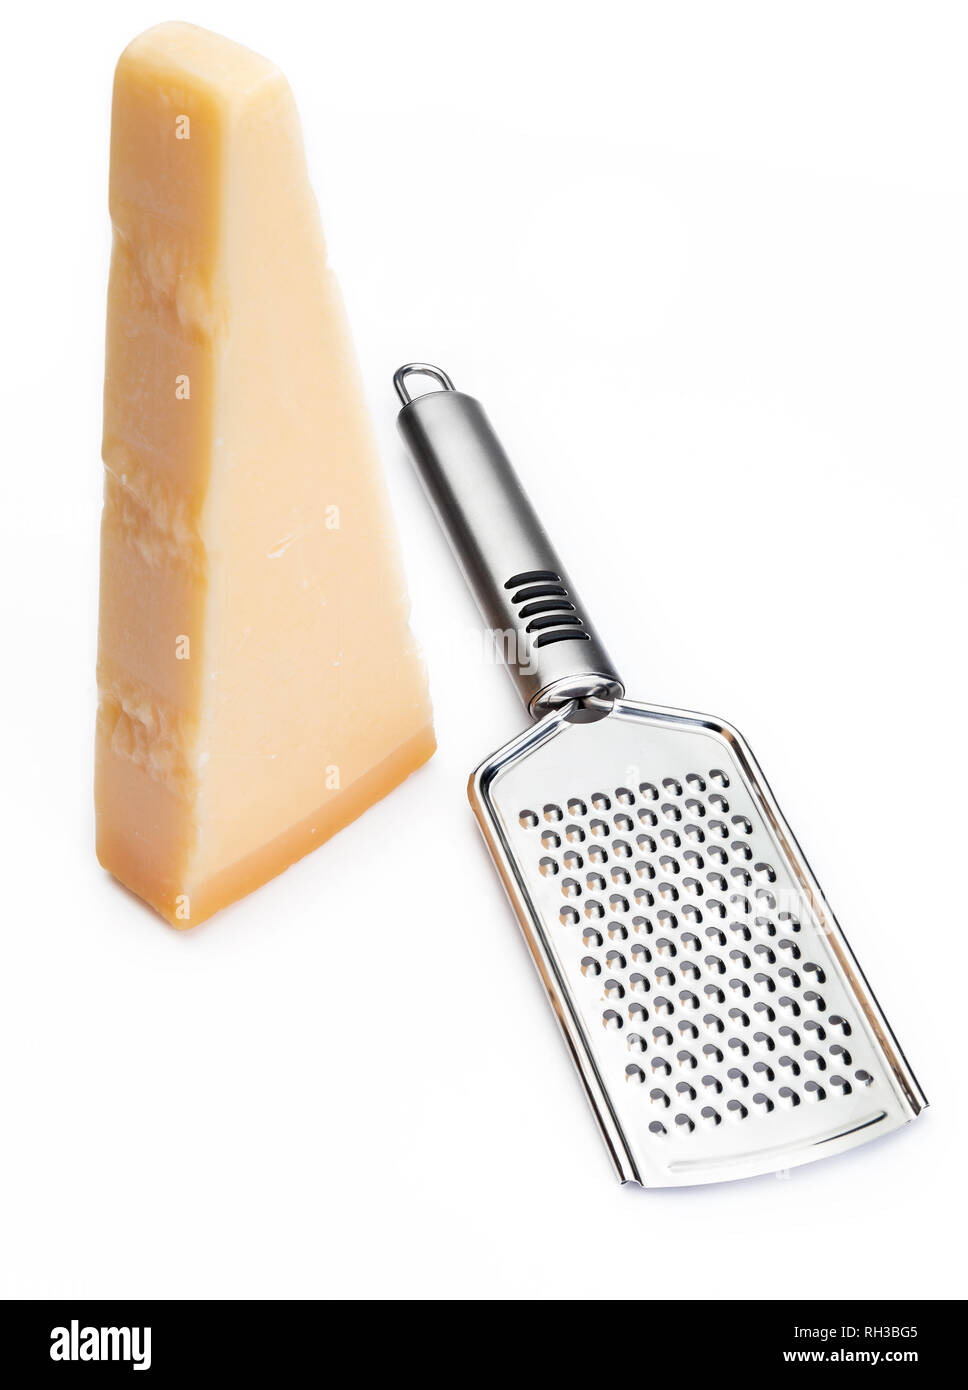 Italian hard cheese with grater on wooden background Stock Photo - Alamy